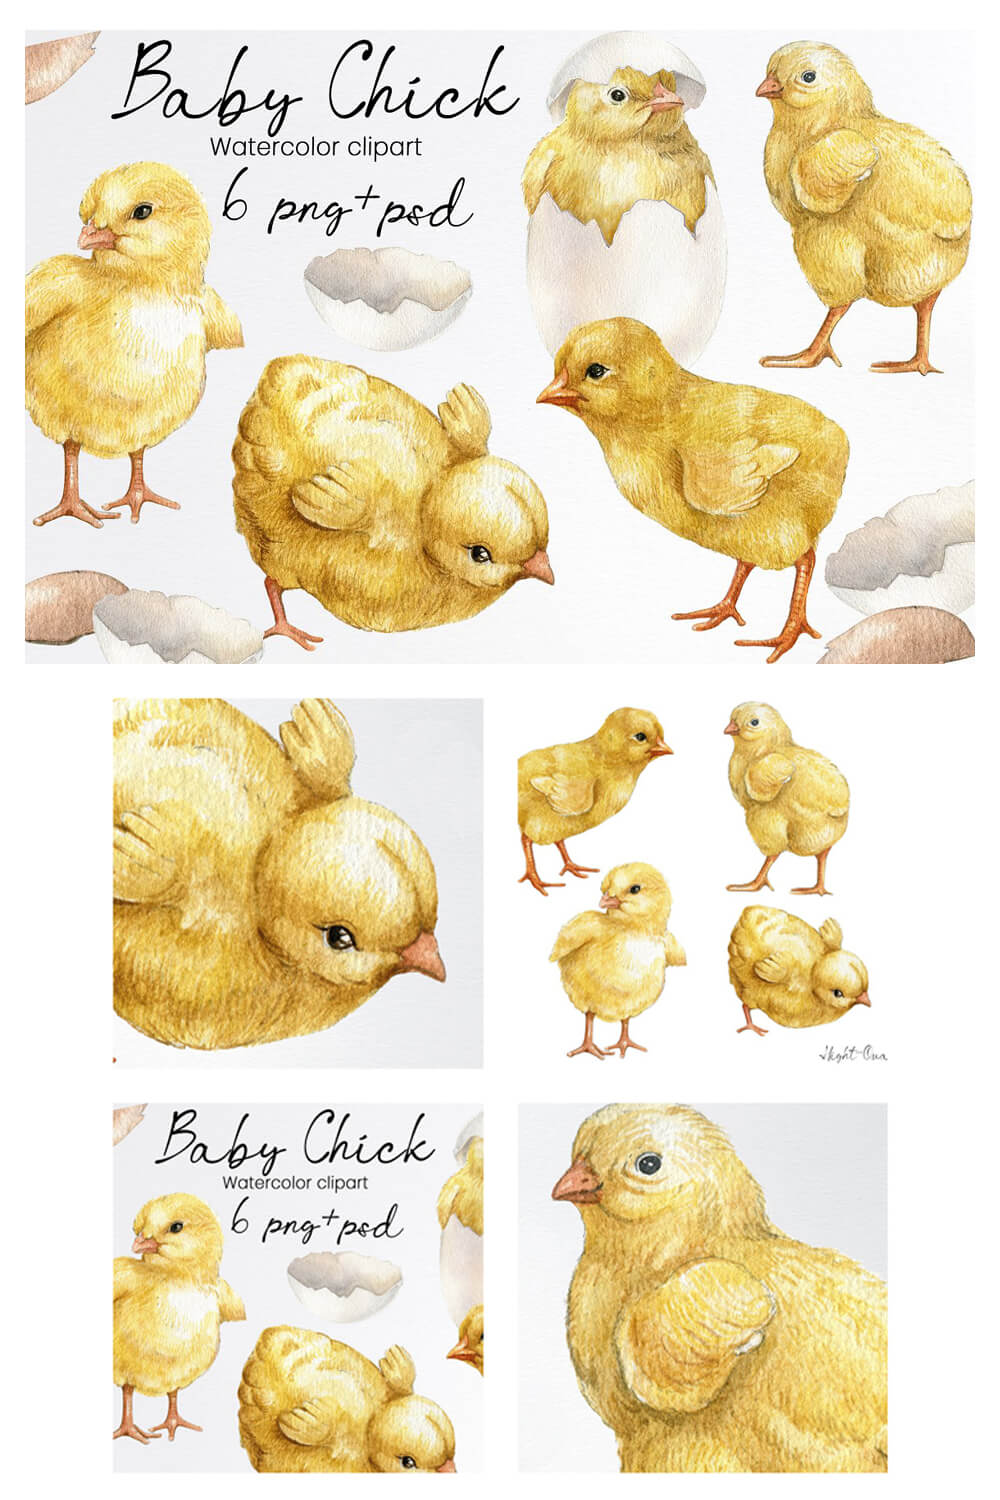 Inscription on picture: Baby Chick Watercolor clipart, 6 png+psd.